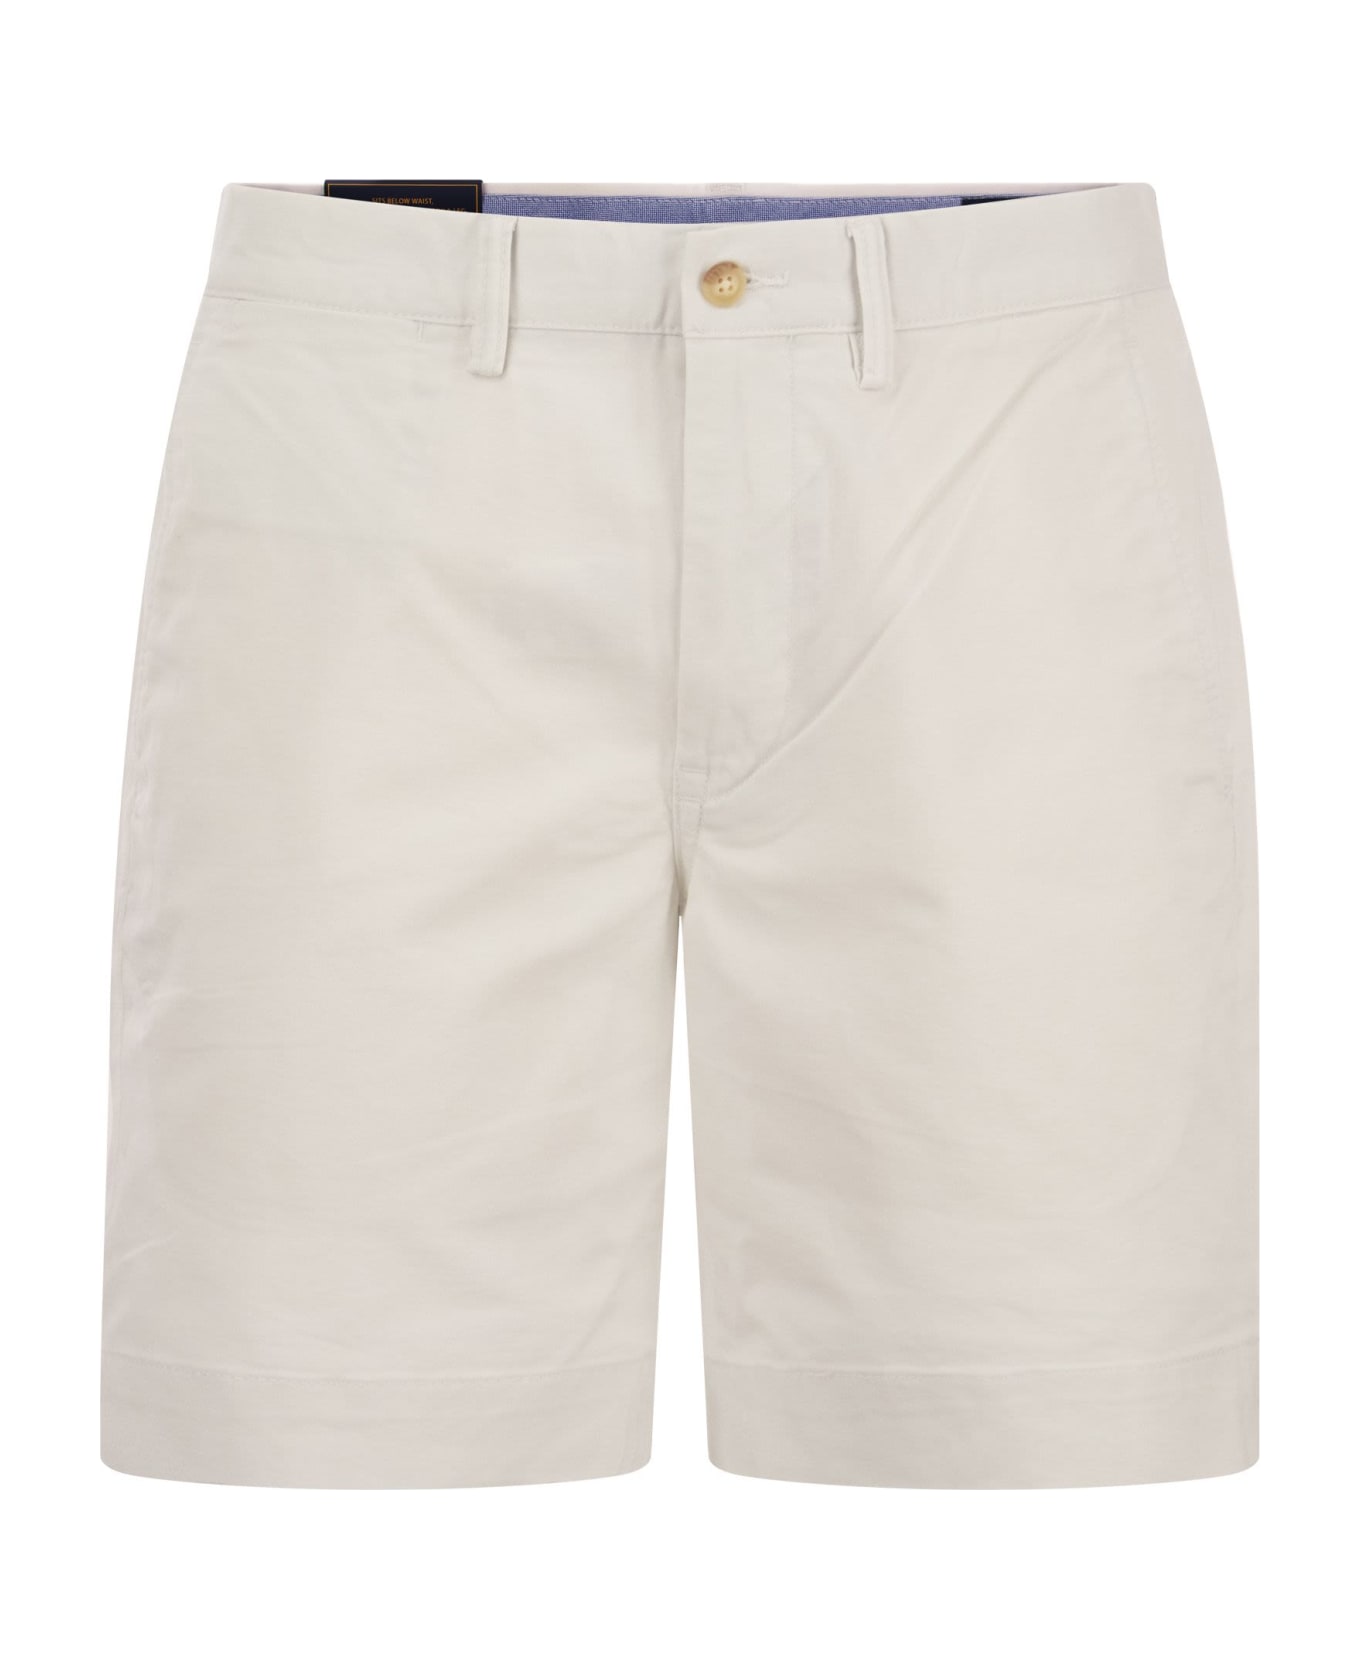 Polo Ralph Lauren Logo Embroidery Shorts - White ボトムス